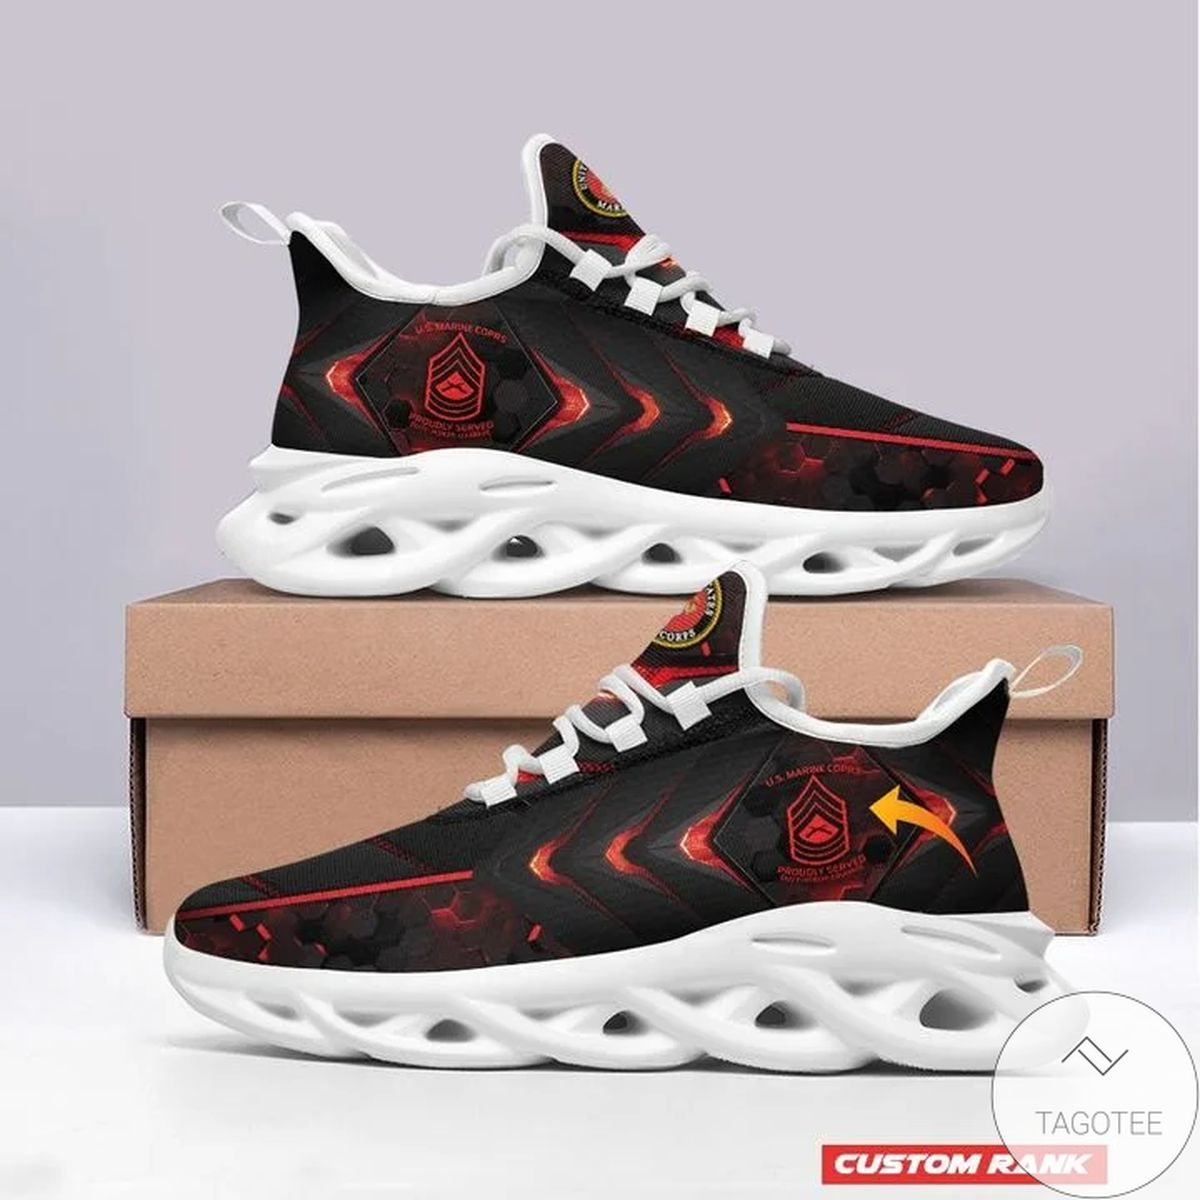 Personalized Customized Rank US Marine Sneaker Max Soul Shoes